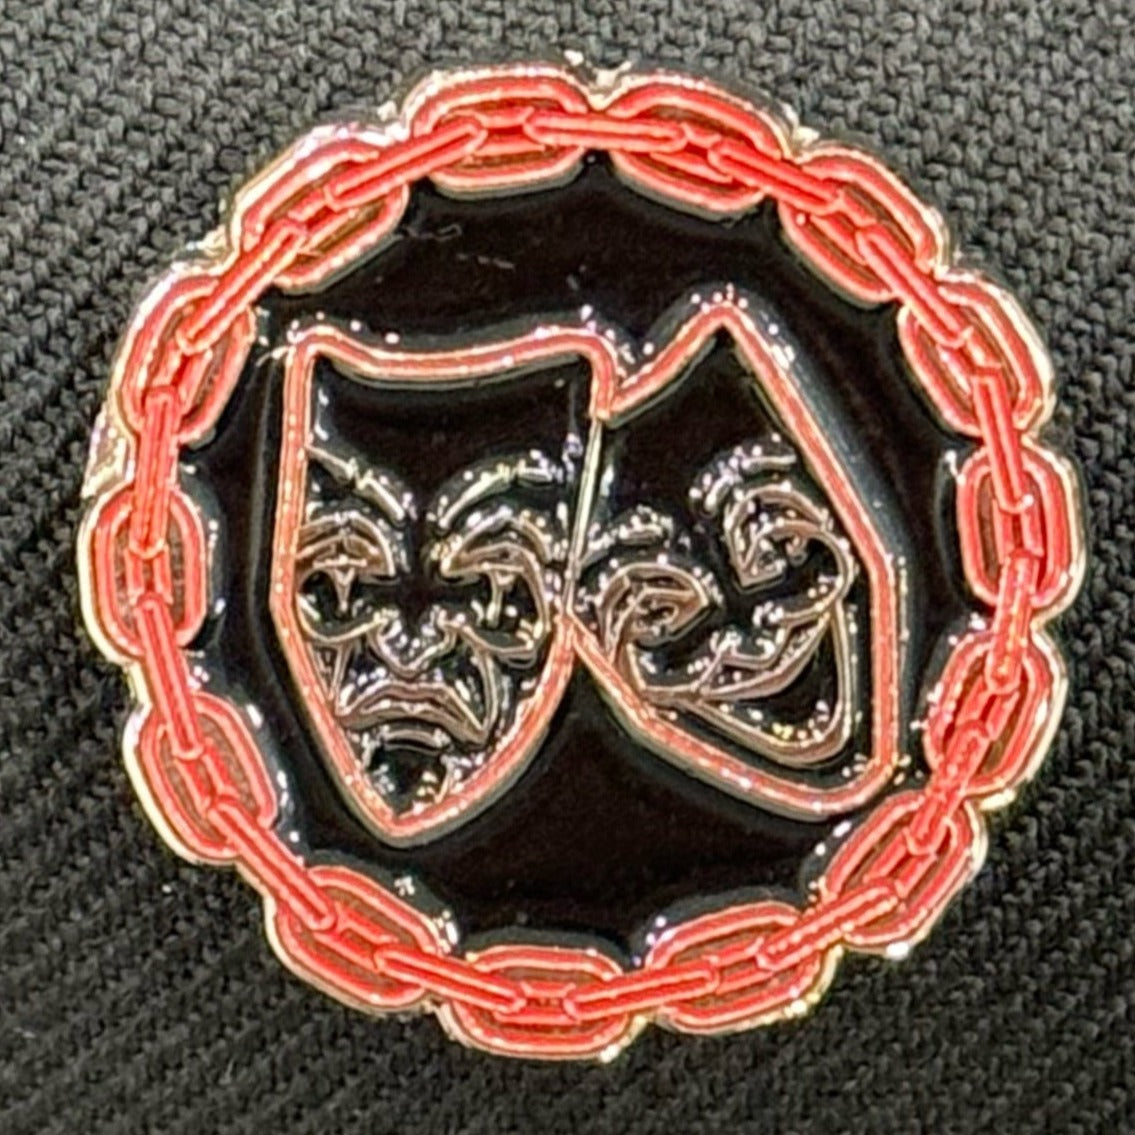 MIGHTY NYC FACES OF LIFE (RED) PIN